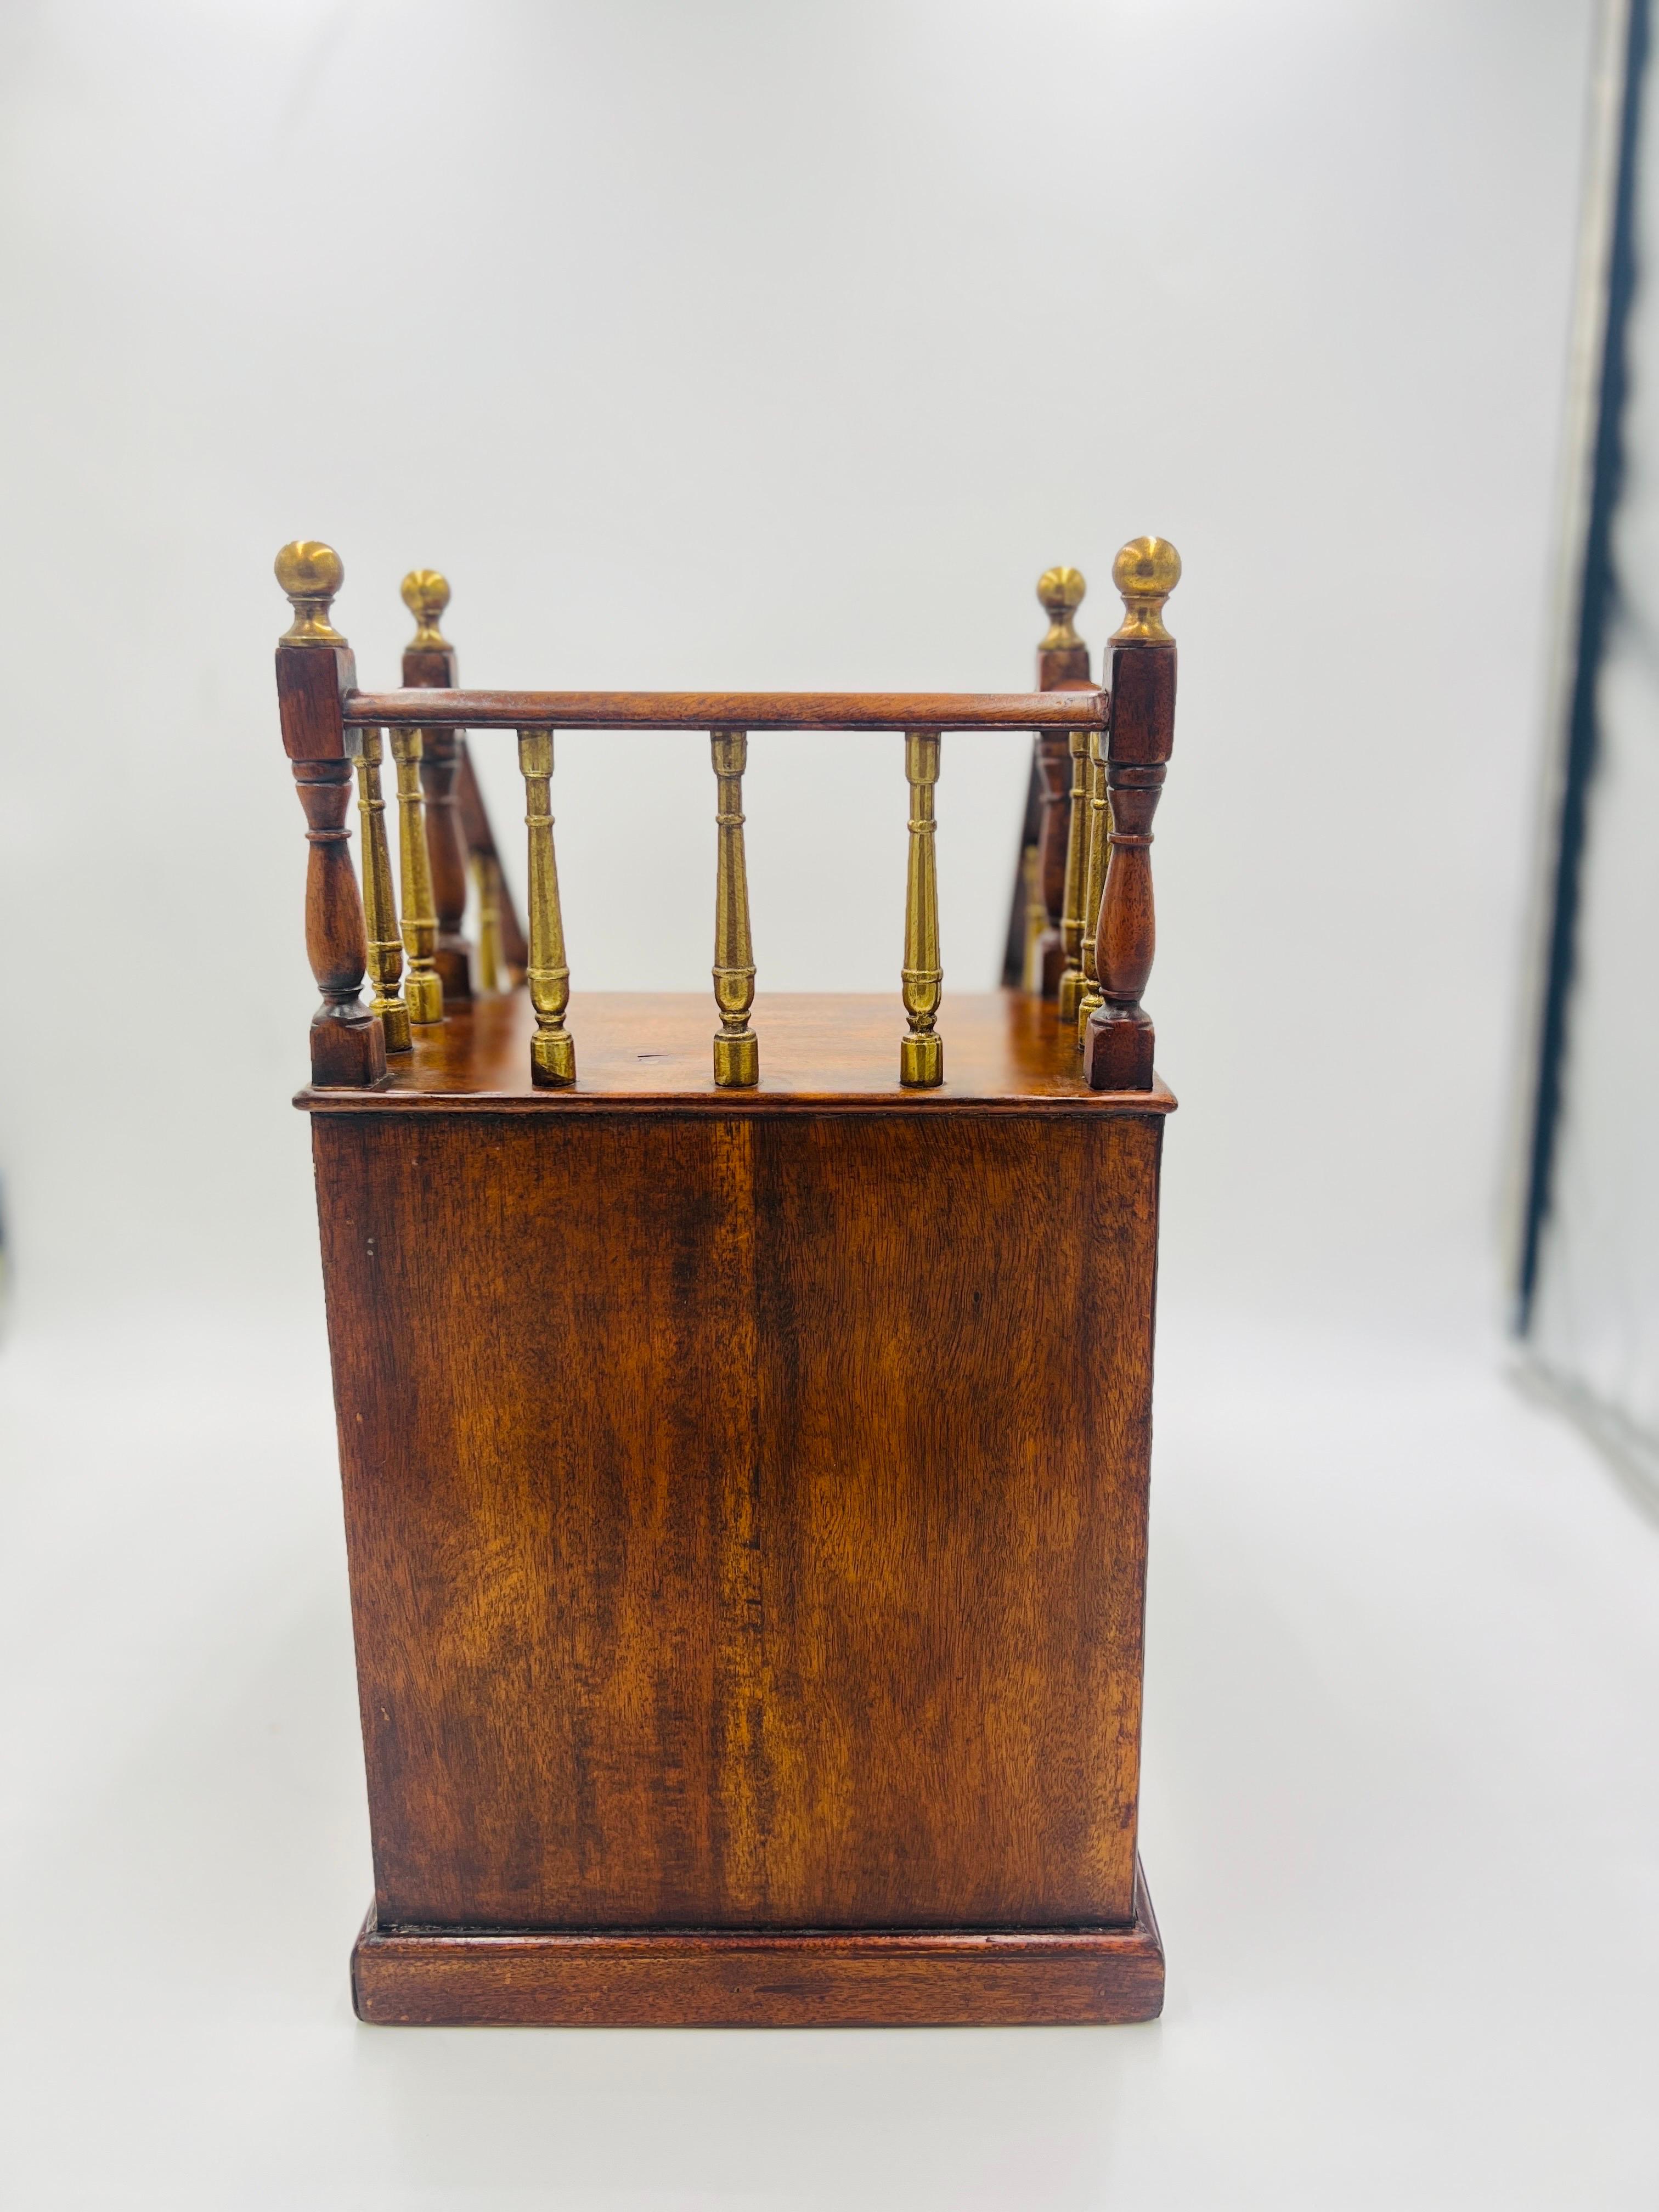 Antique Edwardian Mahogany Staircase Model with Brass Finial Newel Posts For Sale 2